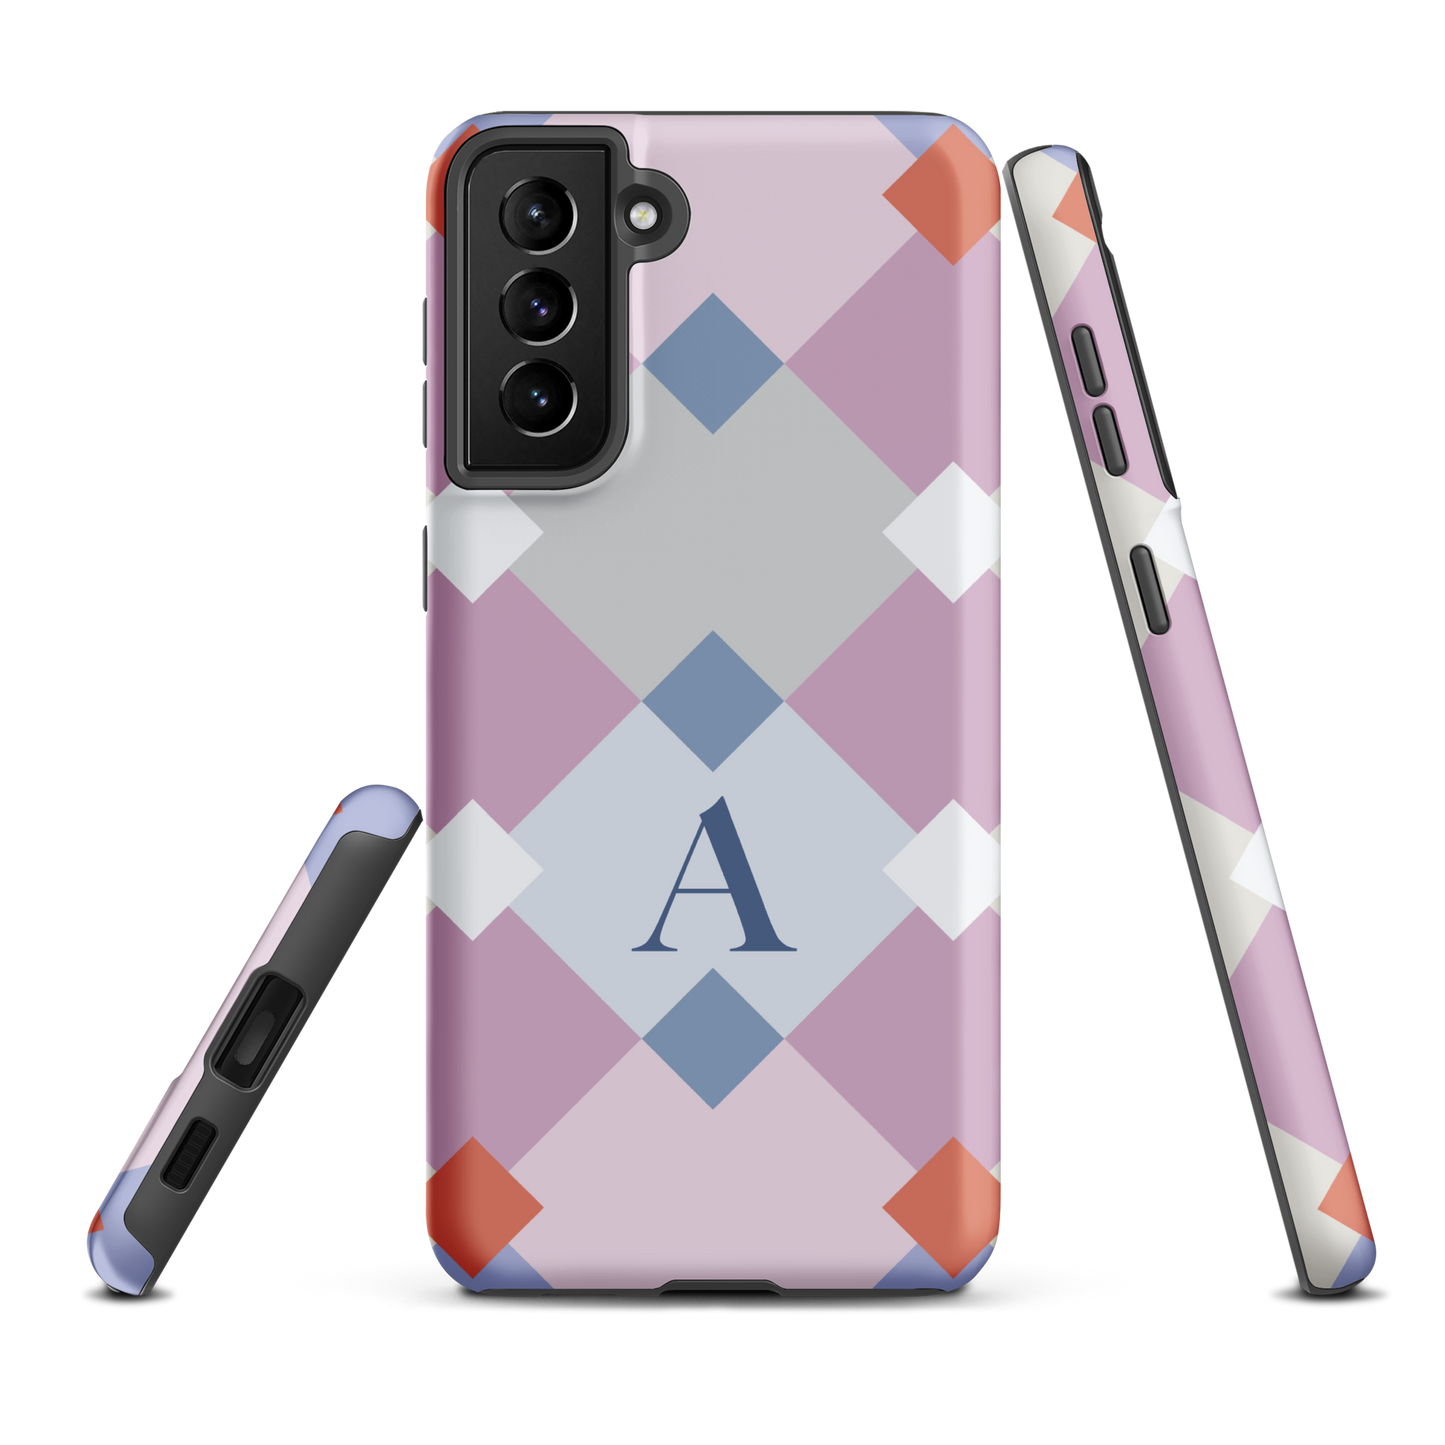 Tough case for Samsung Galaxy Variations | Monogramed Geometric Shaped